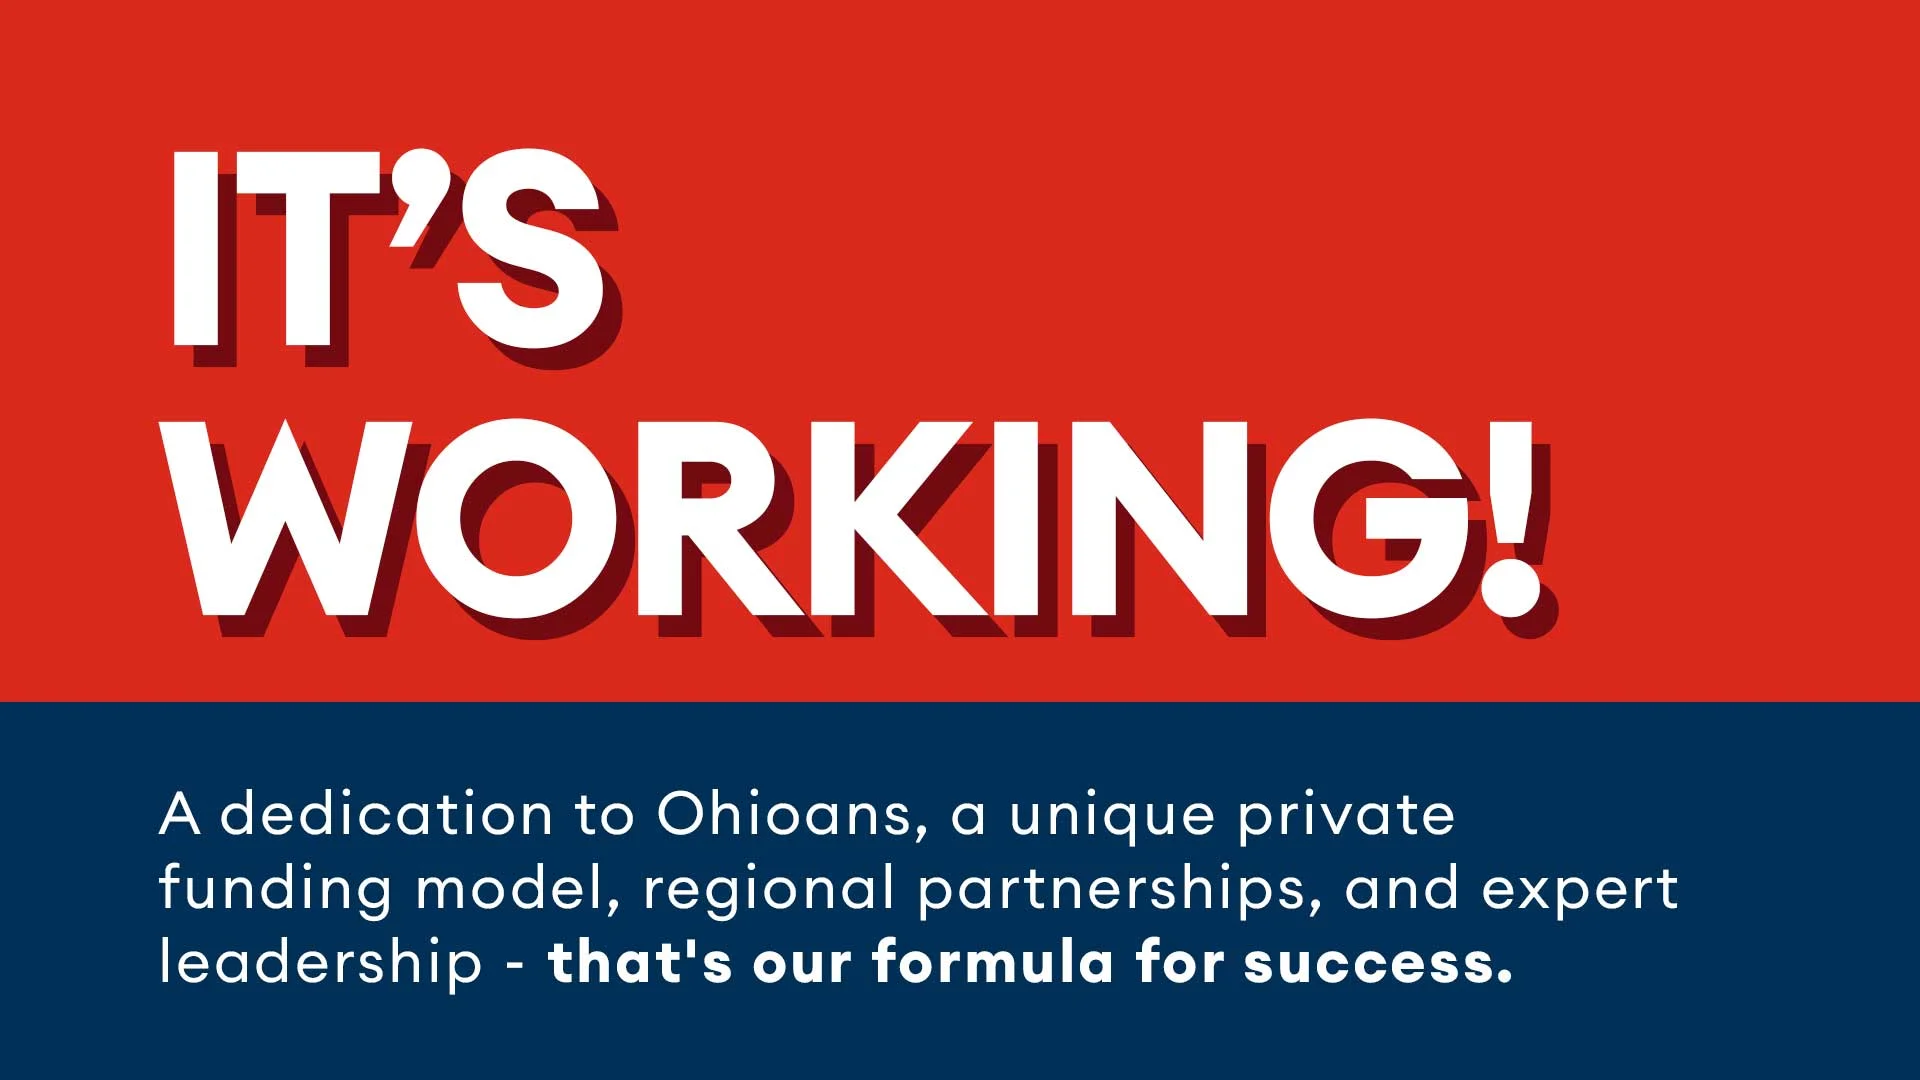 A dedication to Ohioans, a unique private funding model, regional partnerships, and expert leadership - that's our formula for success.